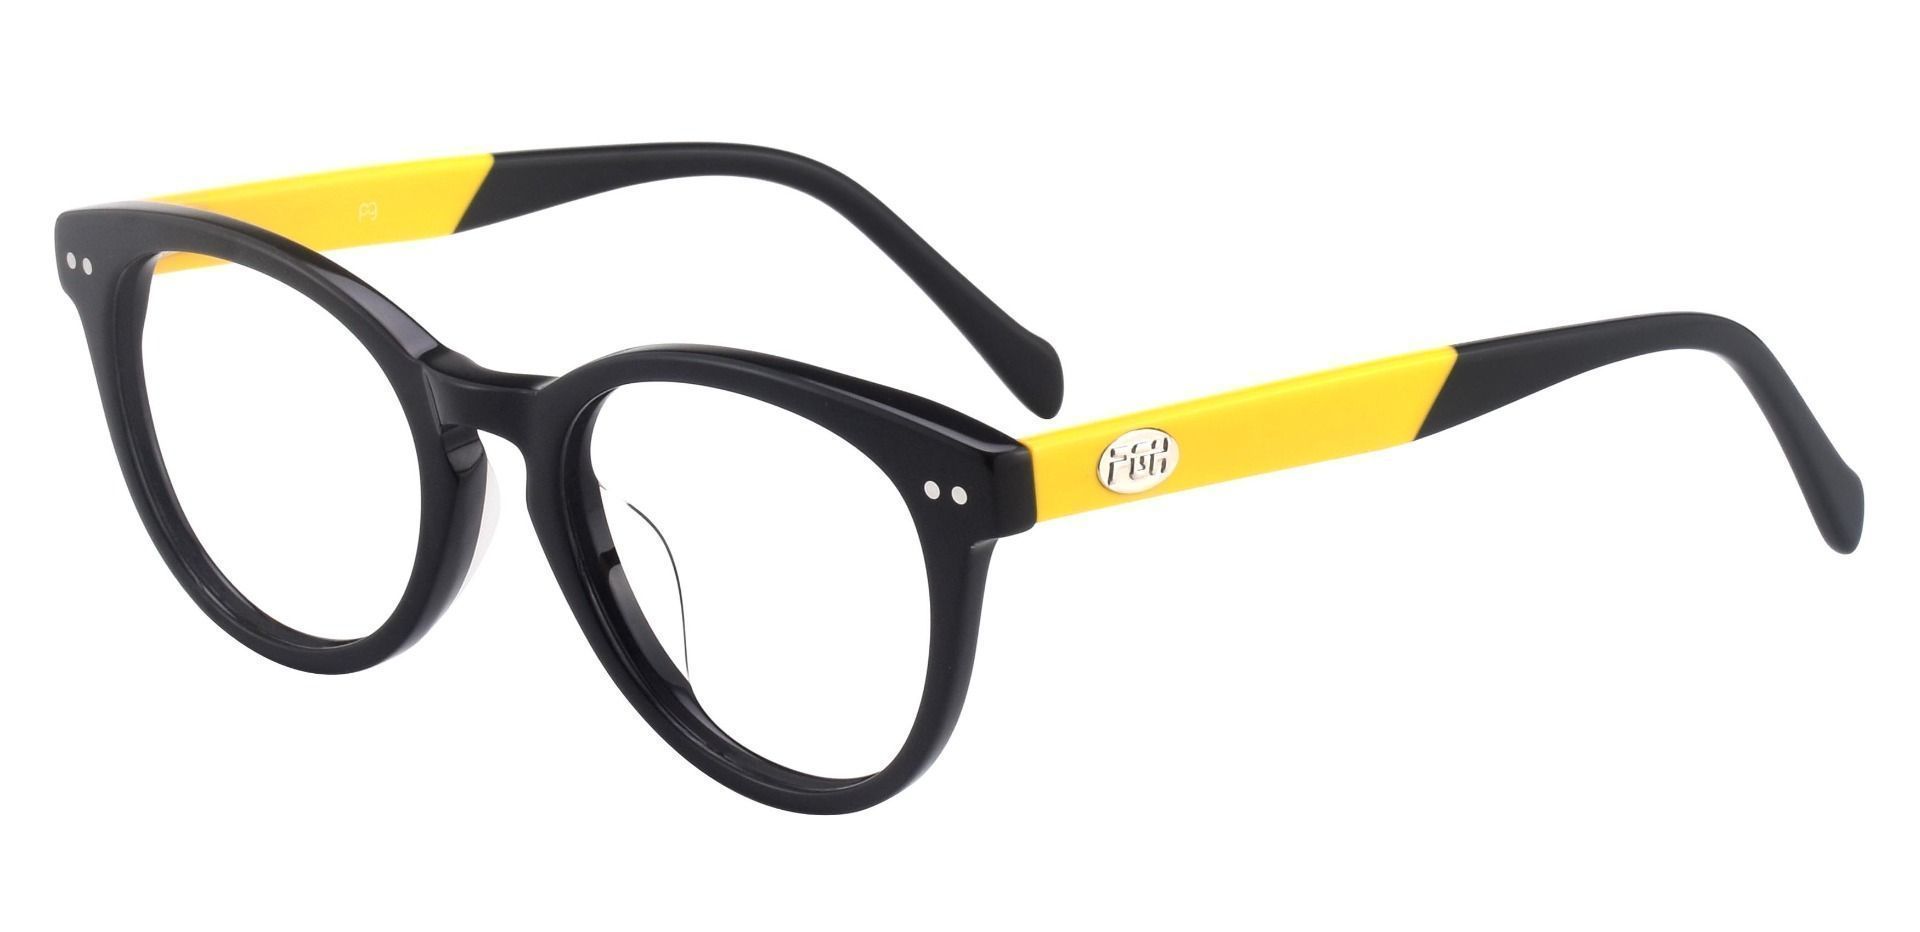 Forbes Oval Eyeglasses Frame - The Frame Is Black And Gold